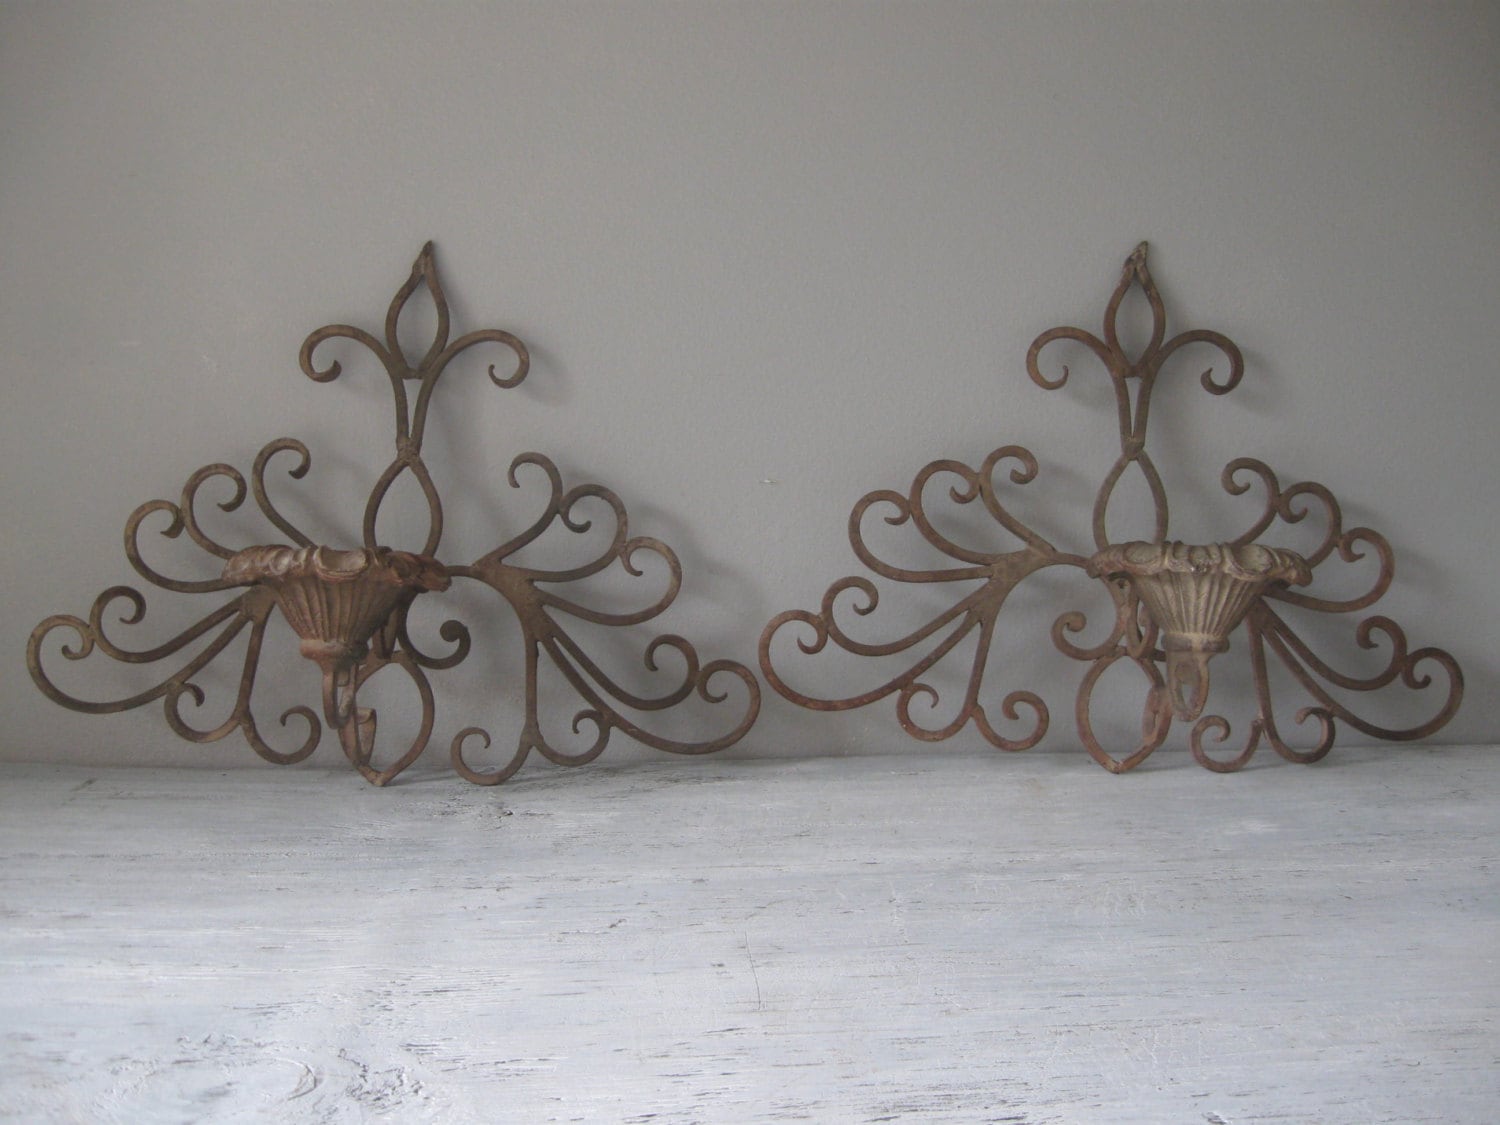 Vintage Wrought Iron Candle Sconces / Wall Decor by thefeedstore